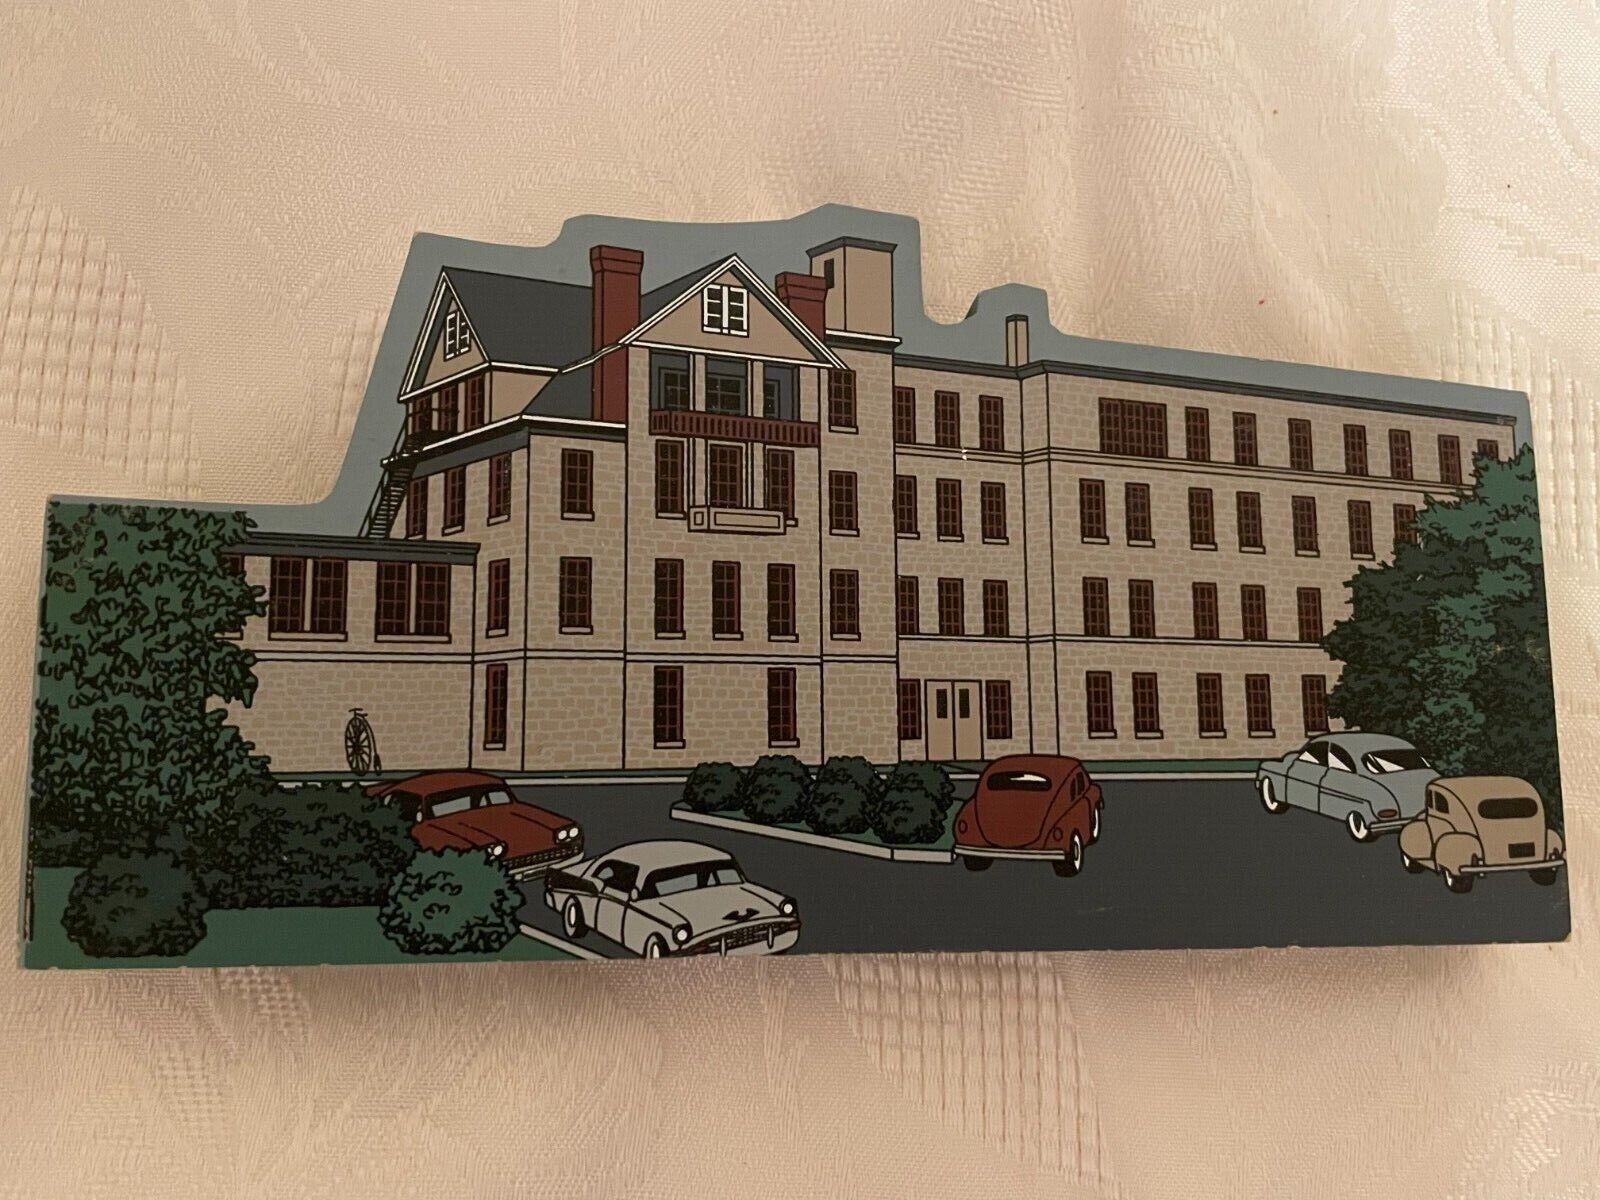 1999 Hometowne Collectibles Ashland, PA Nurses Residence Wooden Replica